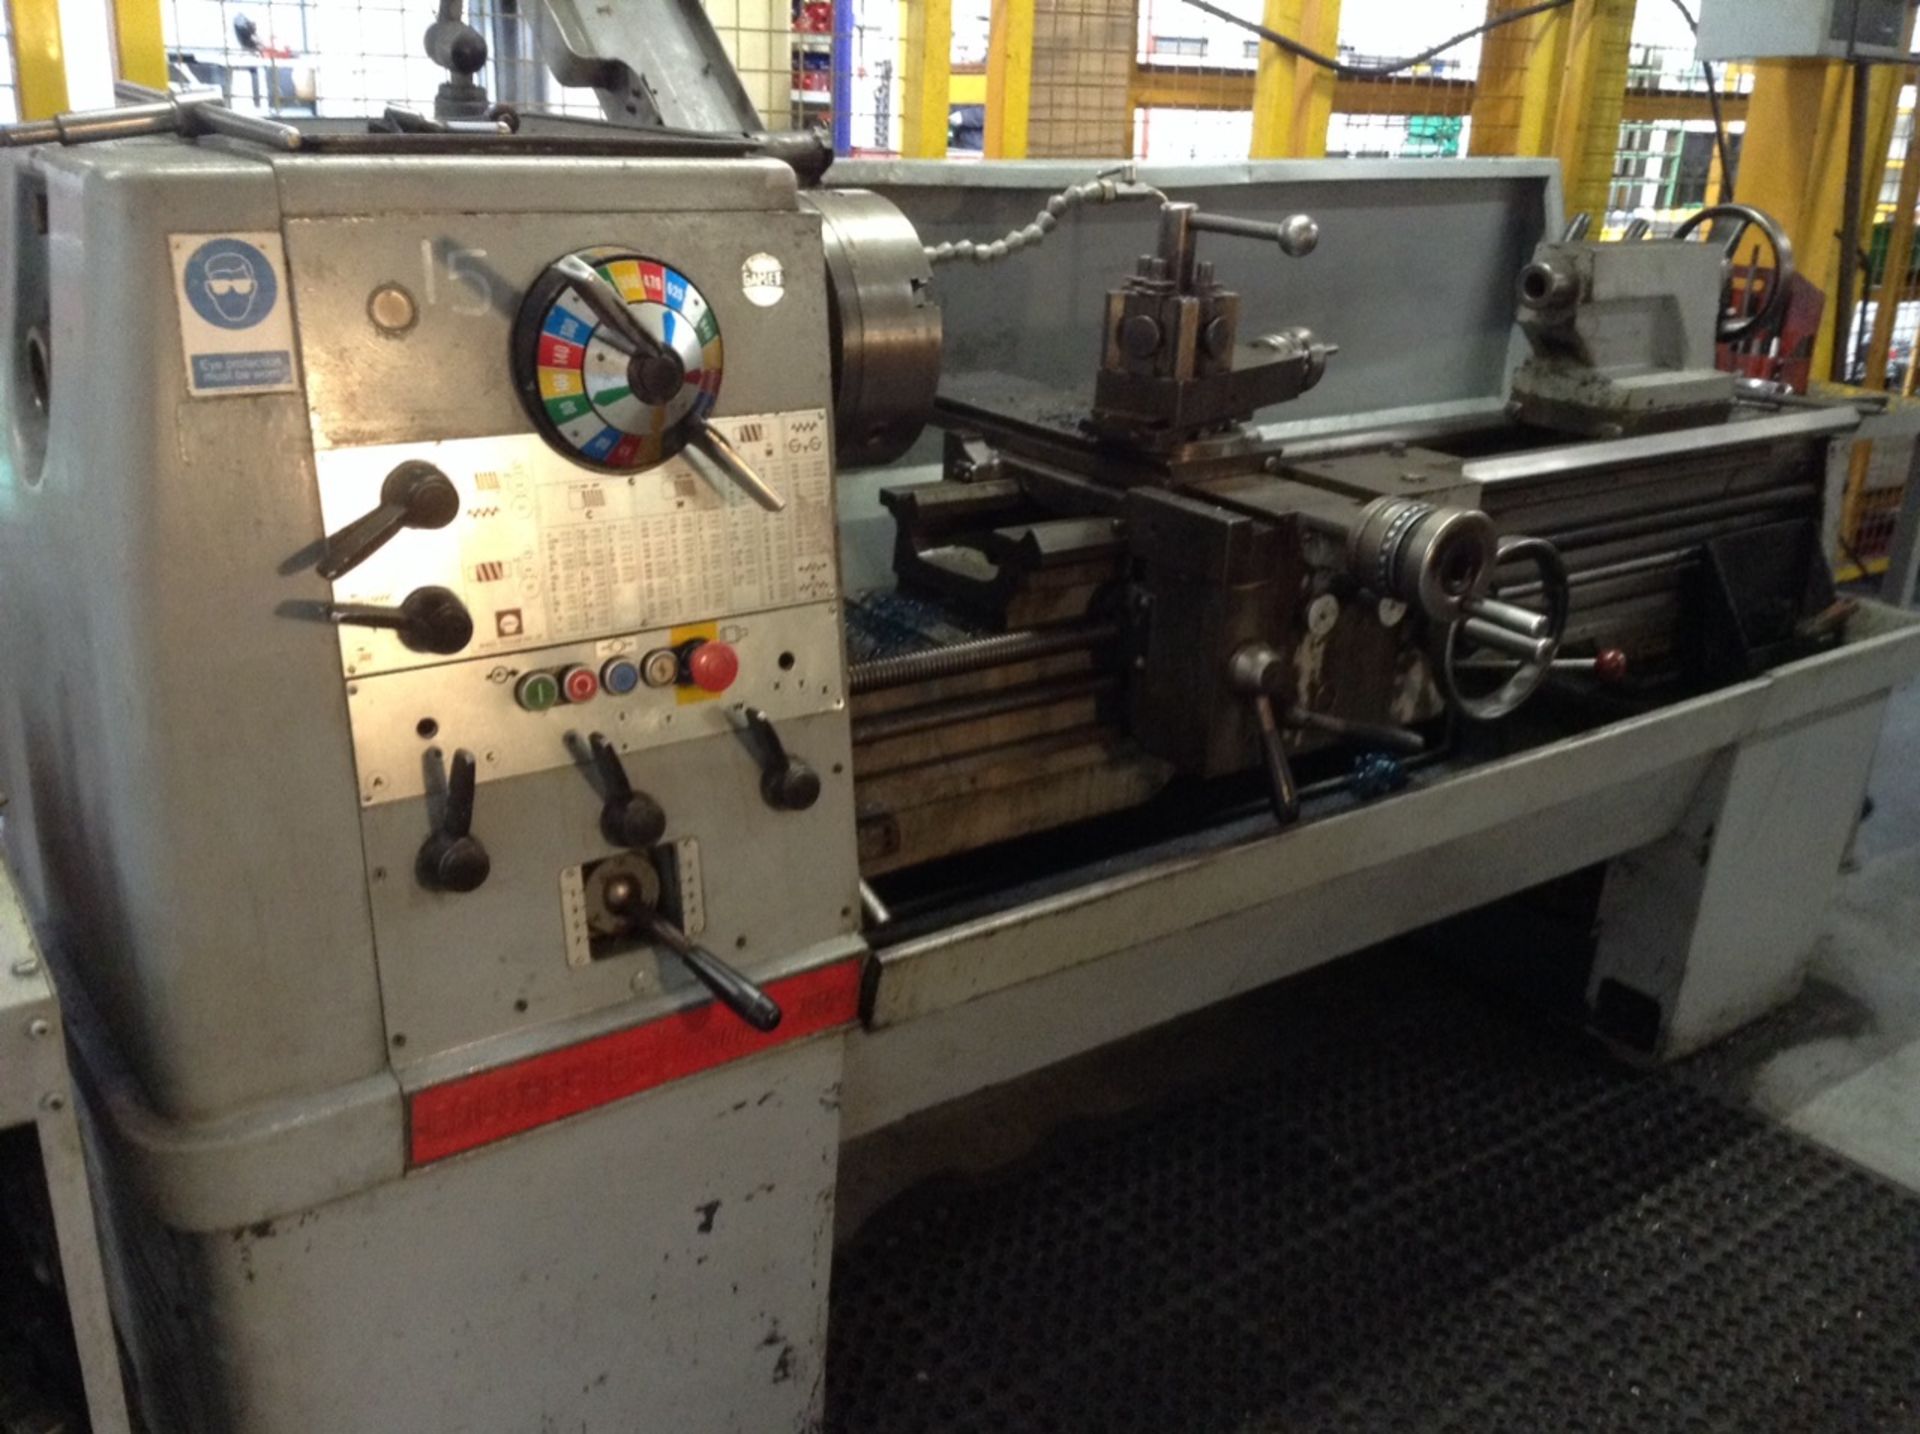 1 Colchester Triumph, 2000, gap bed centre lathe, 48" bed, with tooling as photographed, Serial Numb